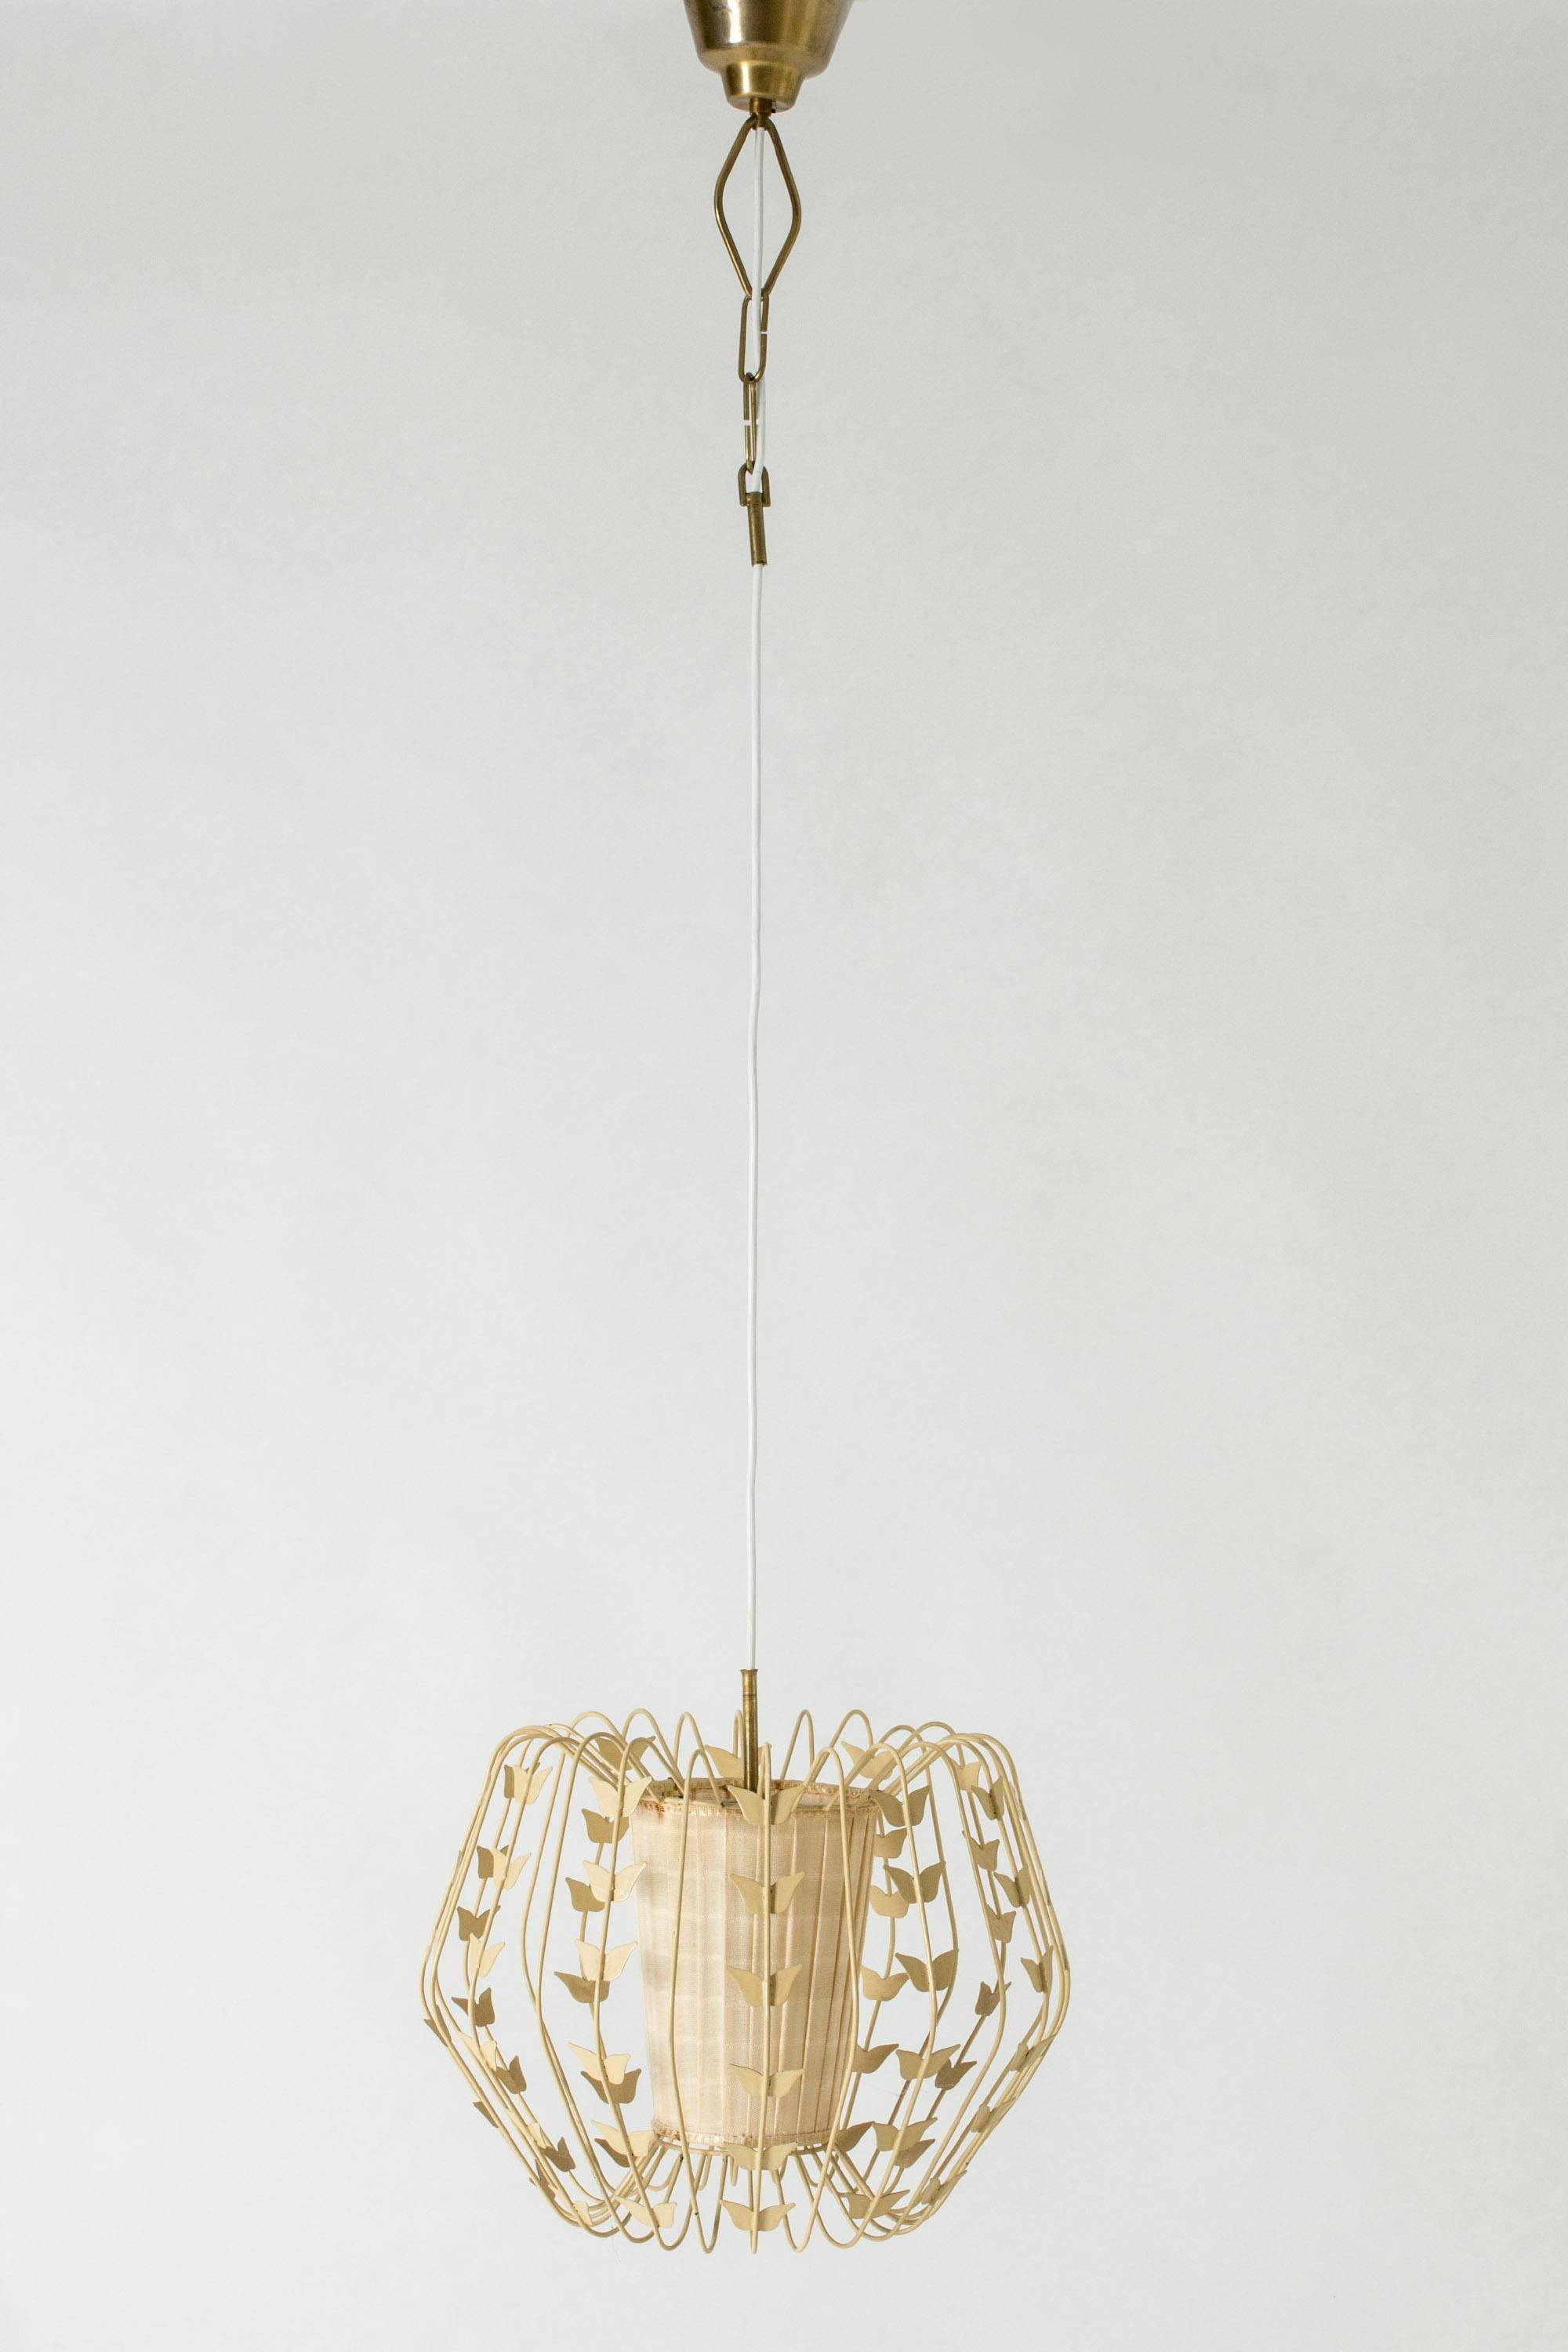 Beautiful pendant light by Hans Bergström, in a voluminous cage design. Lacquered white with decor of appliquéd butterflies. Light source shielded with original white fabric. Decorative chain detail near the ceiling cup.

Hans Bergström was the